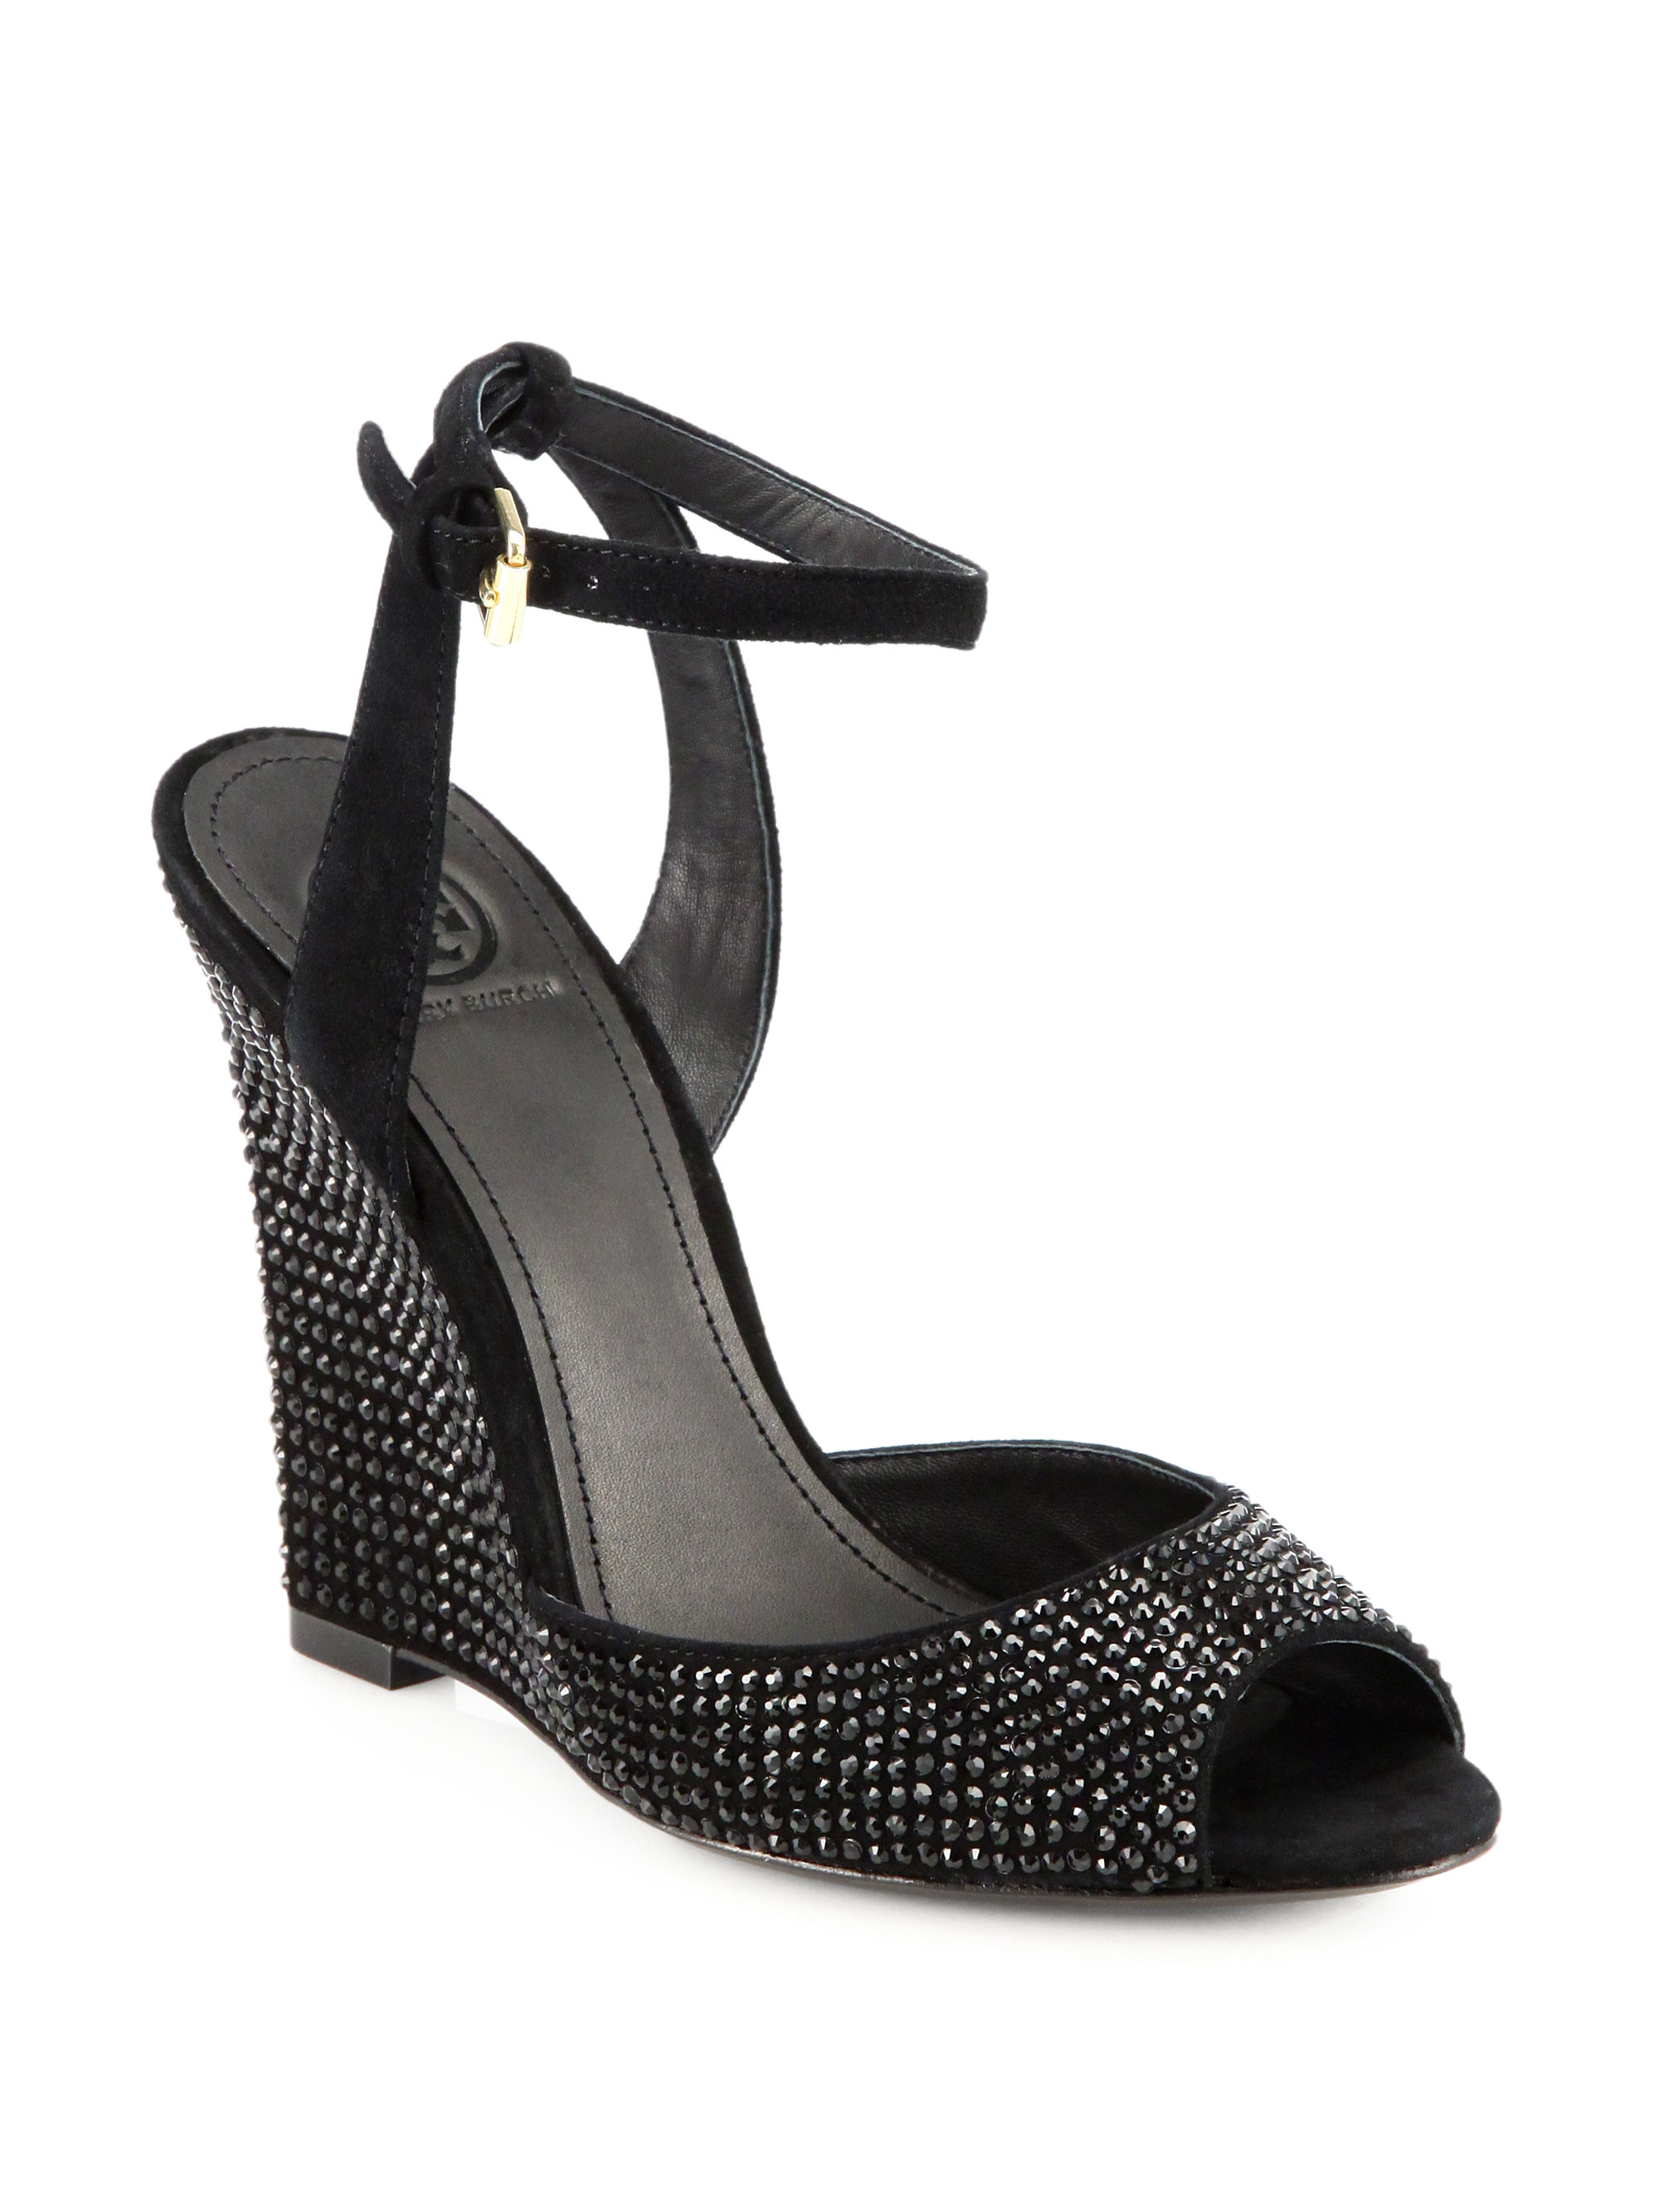 Tory Burch Lila Jeweled Suede Wedge Sandals in Black | Lyst